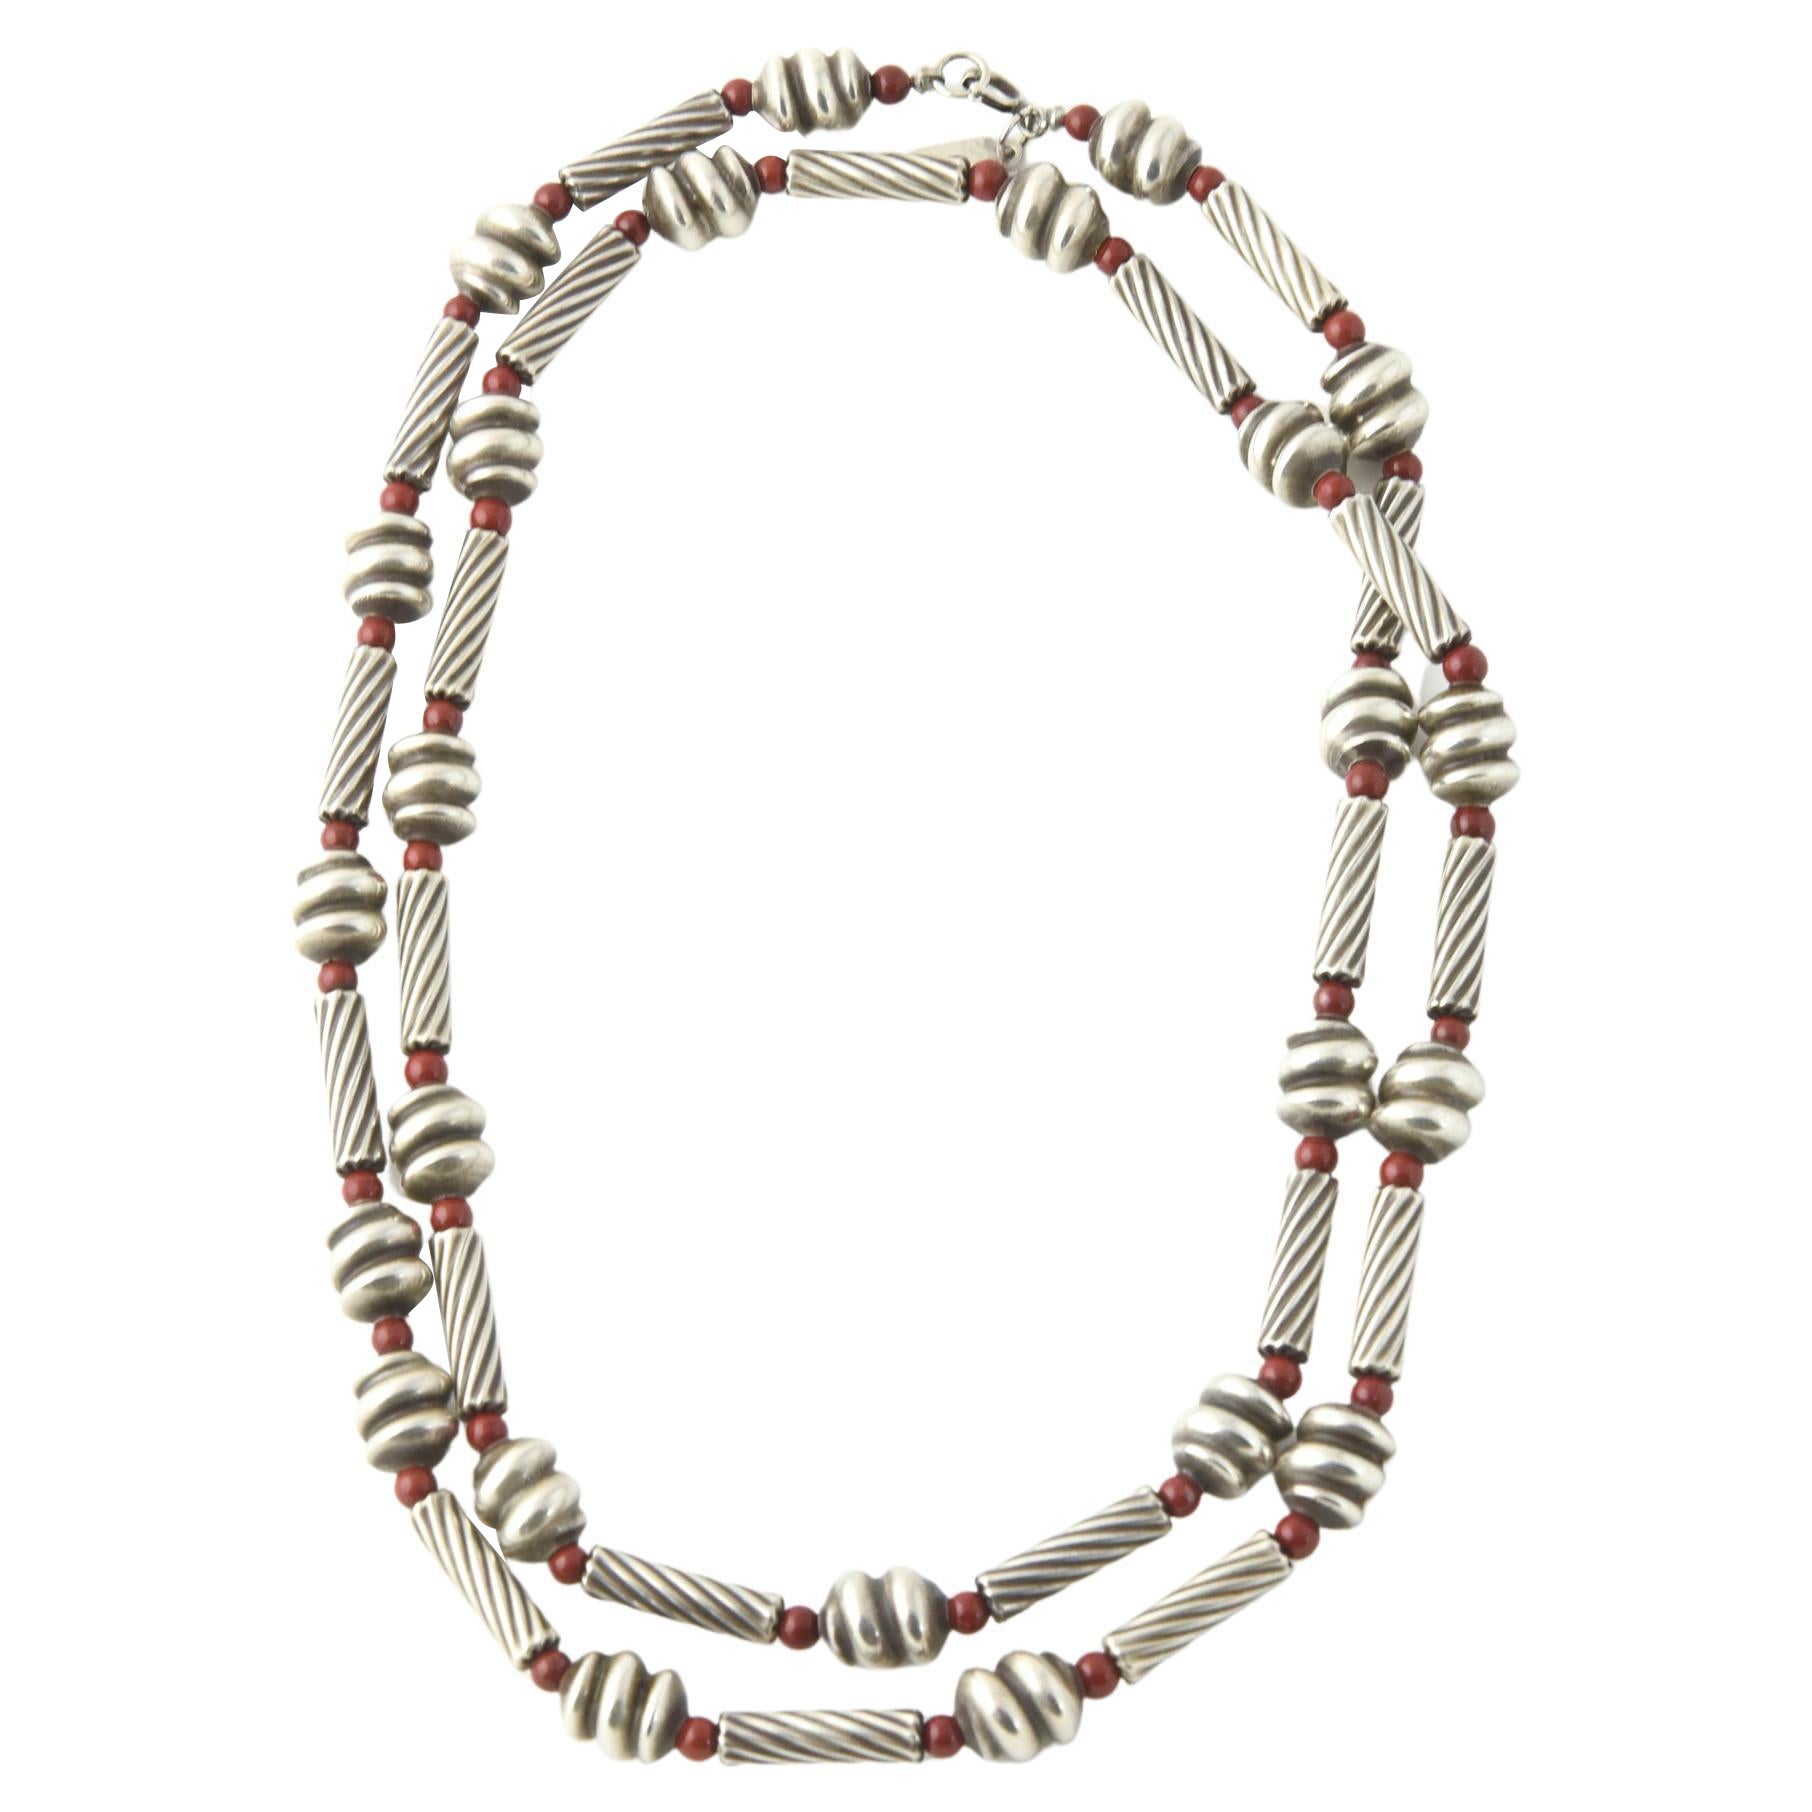 Stylized Sterling Silver and Jasper Bead Long Necklace by Nancy & Rise For Sale